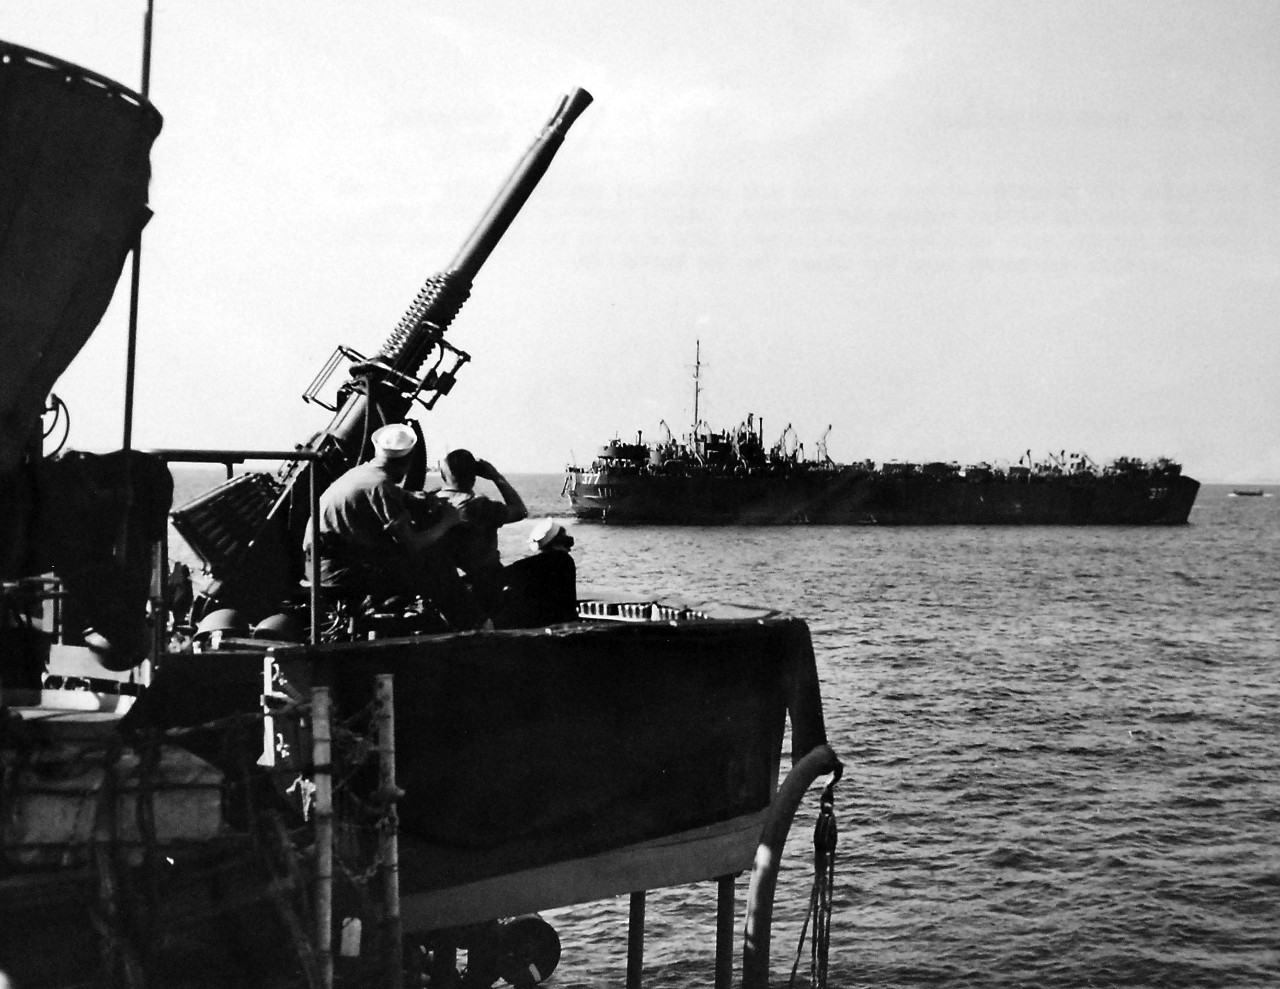 LC-Lot-916-1:   Operation Avalanche, September 1943.  Interlude off Salerno.  After the rear and tension of battle, a calm interval settles upon the Allied convoy off Salerno, Italy.  Guns and men cool off, prepare for the next call to action.   Giant LSTs (shown LST-377) ride on the quiet sea, while anti-aircraft gun crews scan the skies for the Luftwaffe.   Official Navy Photograph. Photographed through Mylar sleeve.   Courtesy of the Library of Congress.  (2016/05/19). 